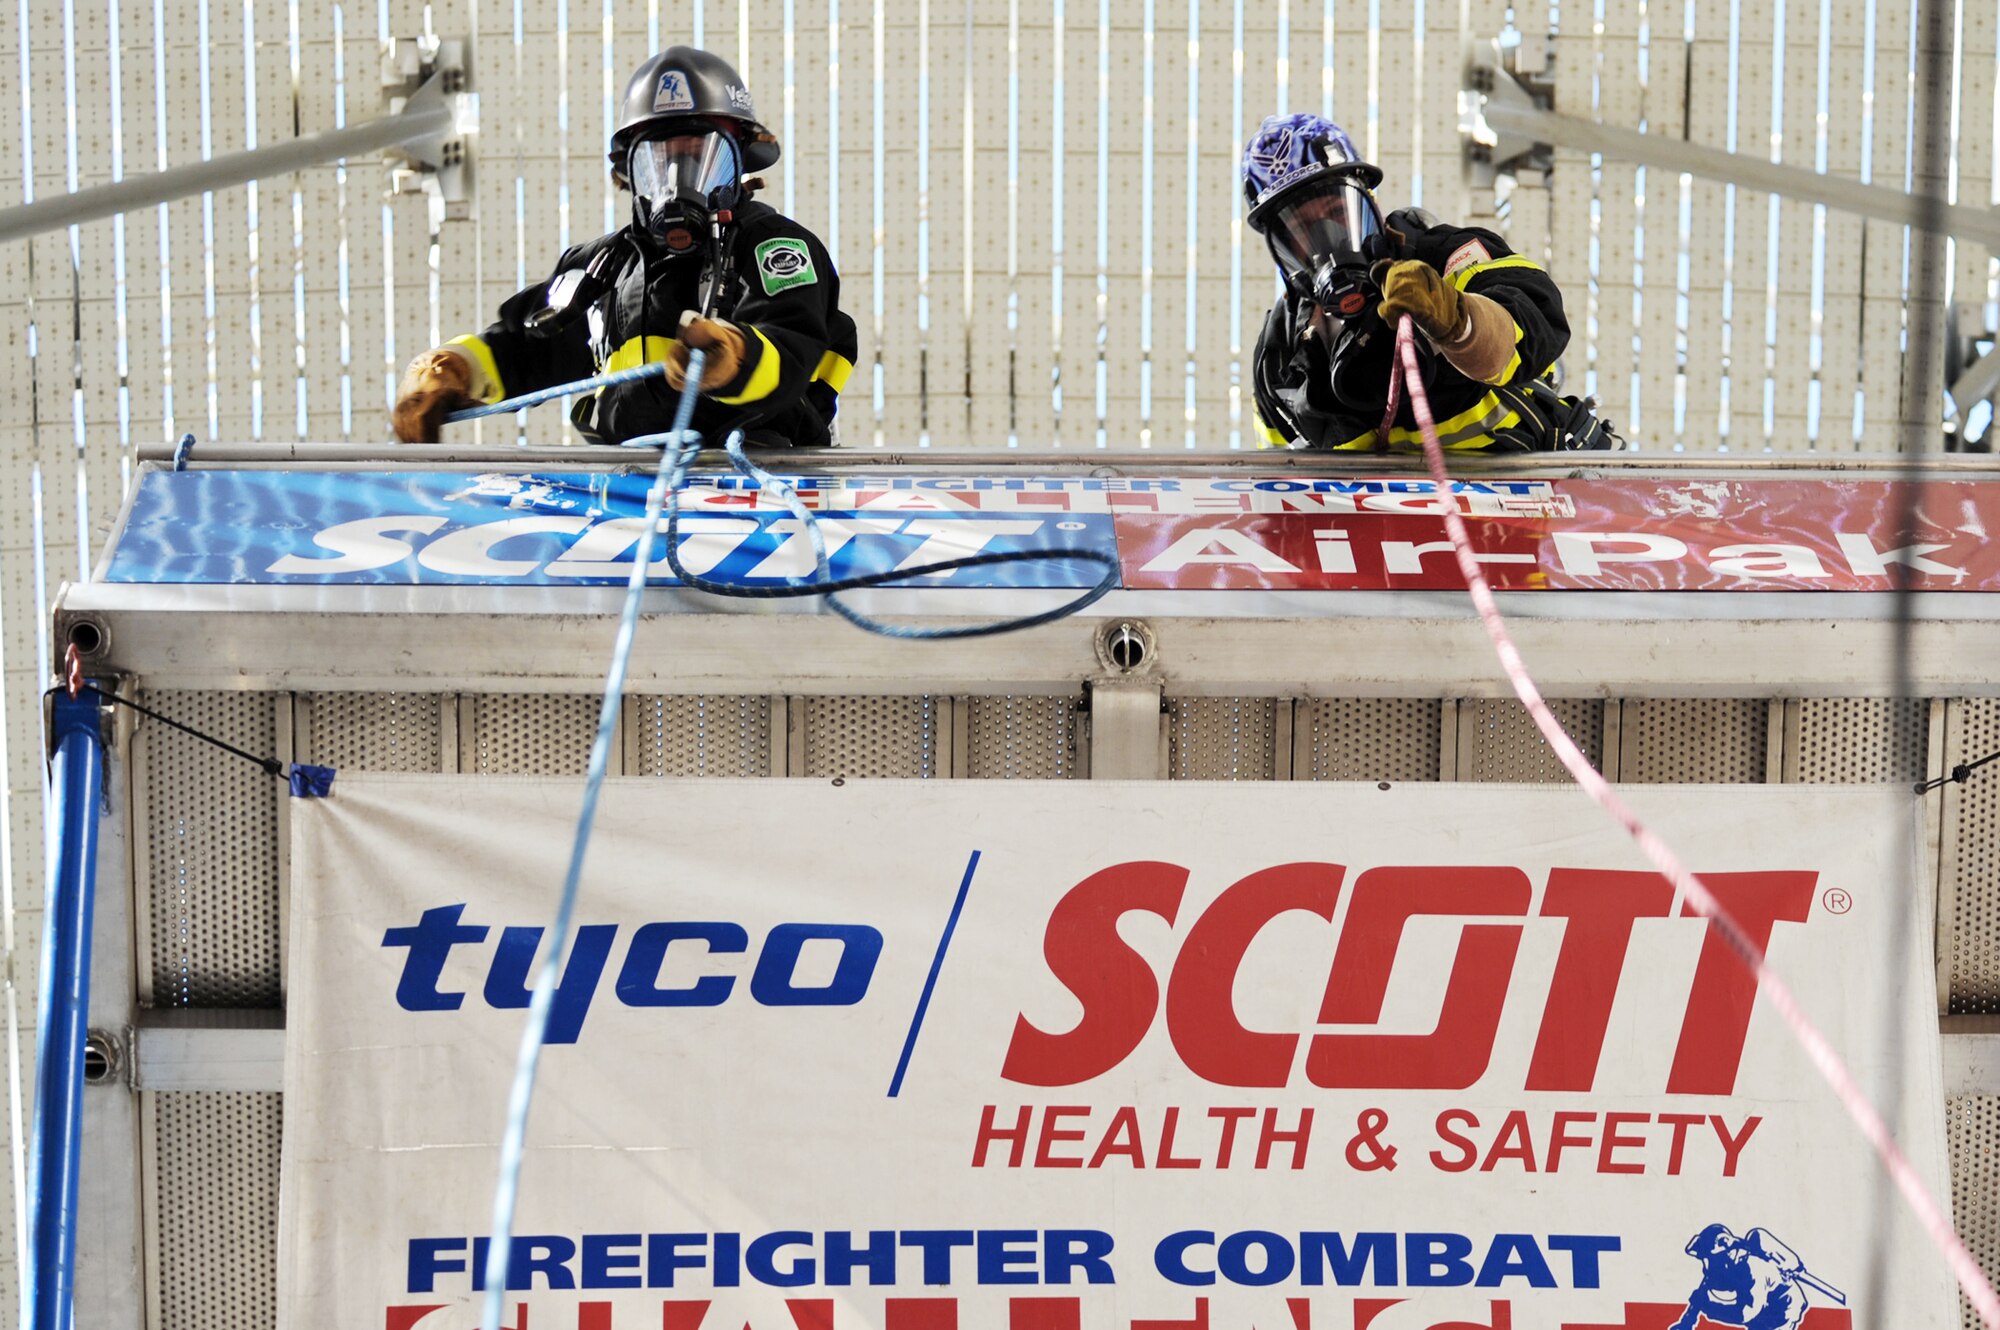 Firefighters from all around the world compete in an individual firefighter event Nov. 17, 2009, at the 2009 Scott Firefighter Combat Challenge in Las Vegas. (U.S. Air Force photo/Staff Sgt. Desiree N. Palacios)
